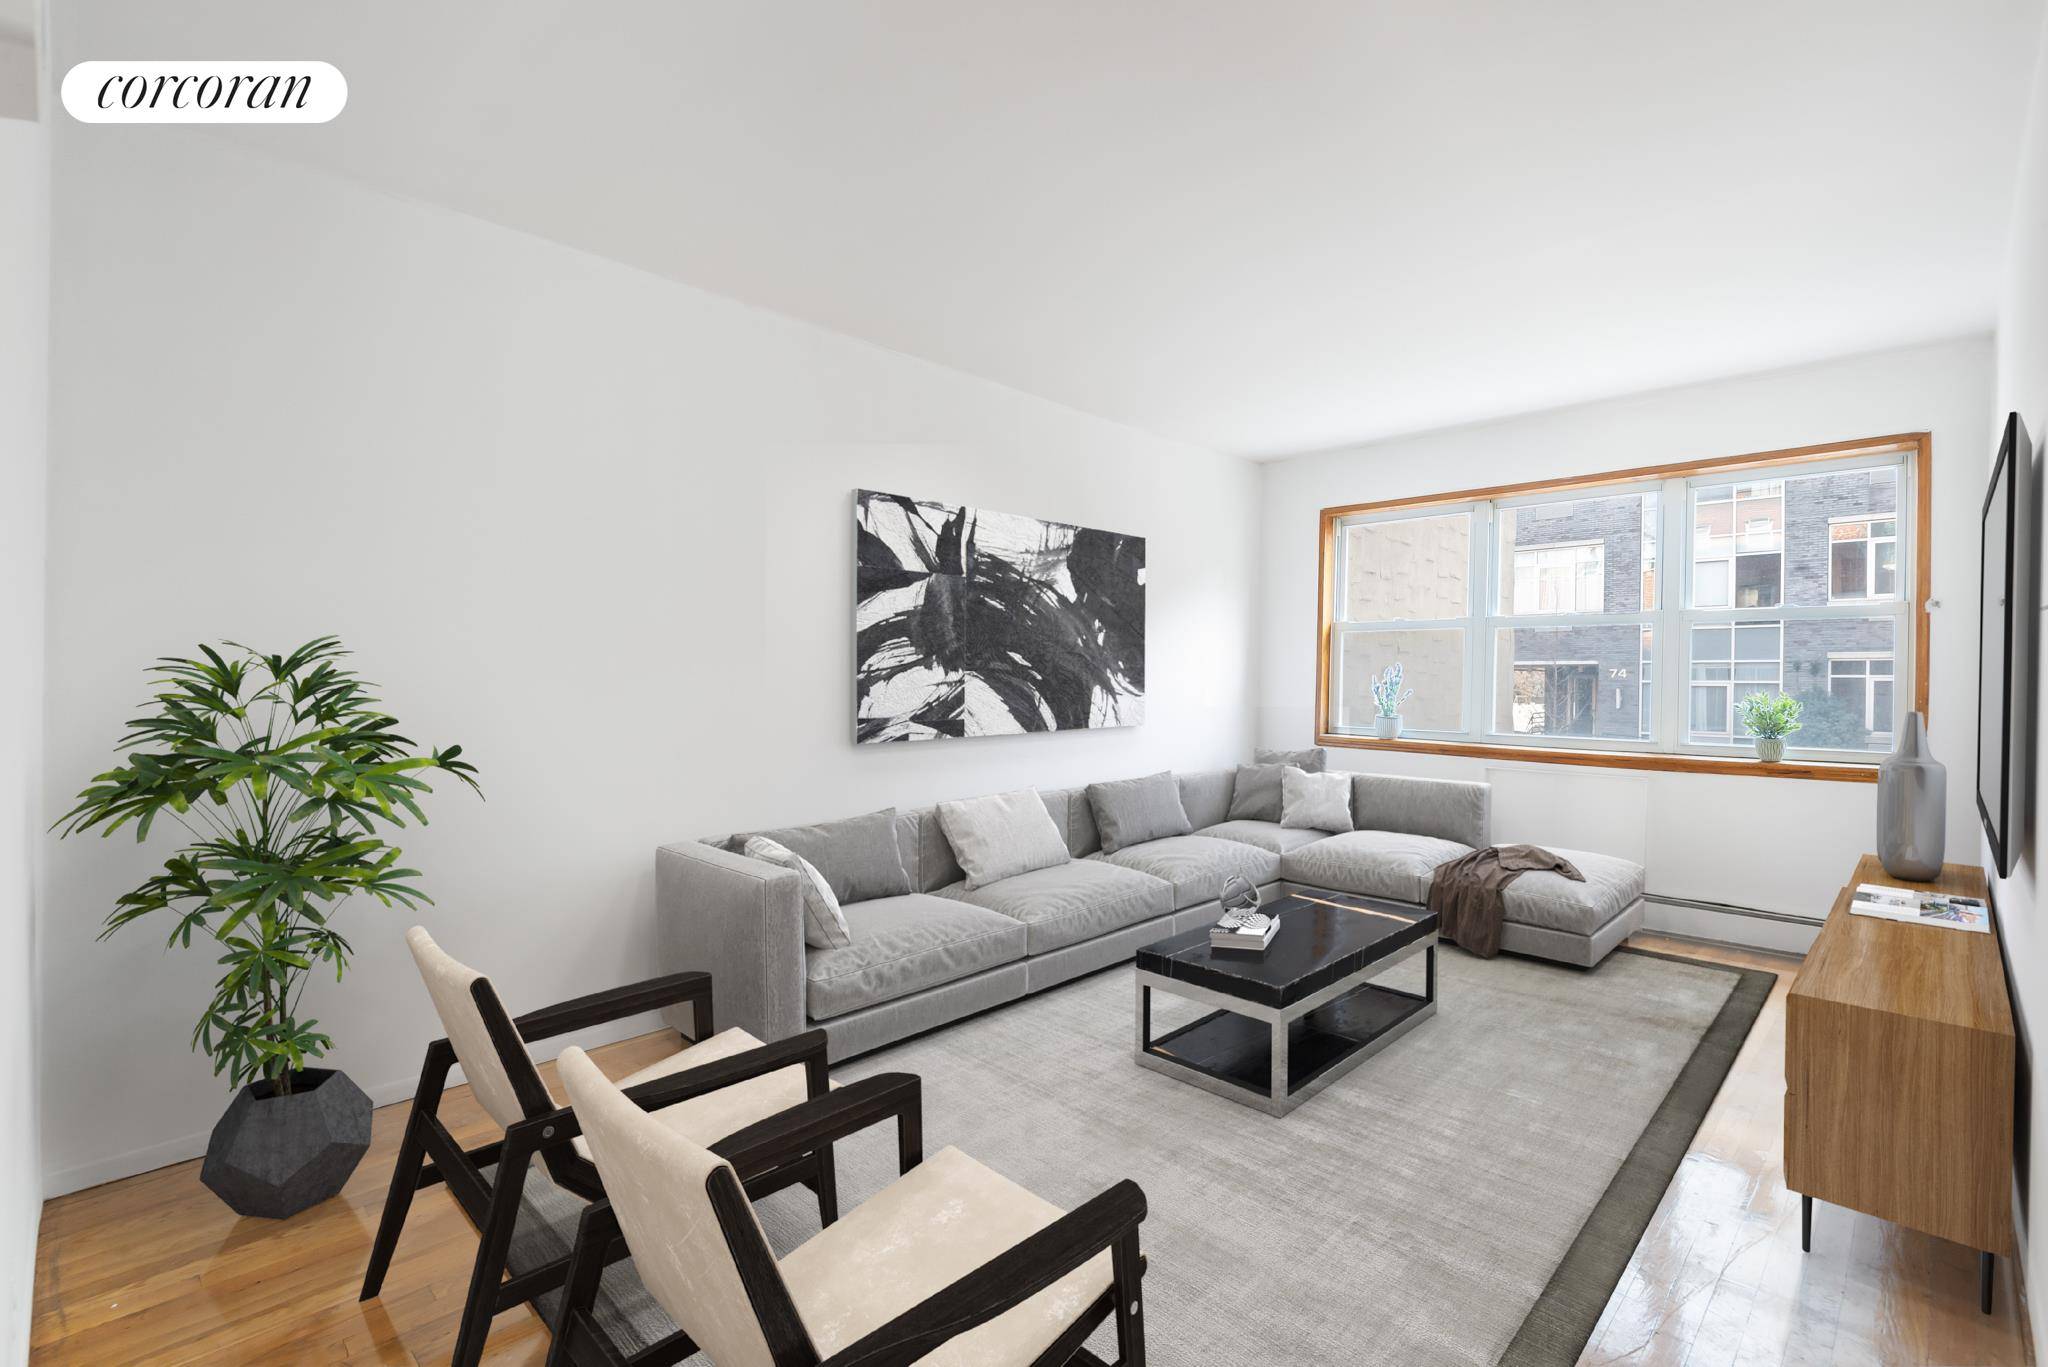 71 S. 4th Street offers the perfect opportunity for a buyer who is seeking to add their own personal touches without undergoing a major renovation.